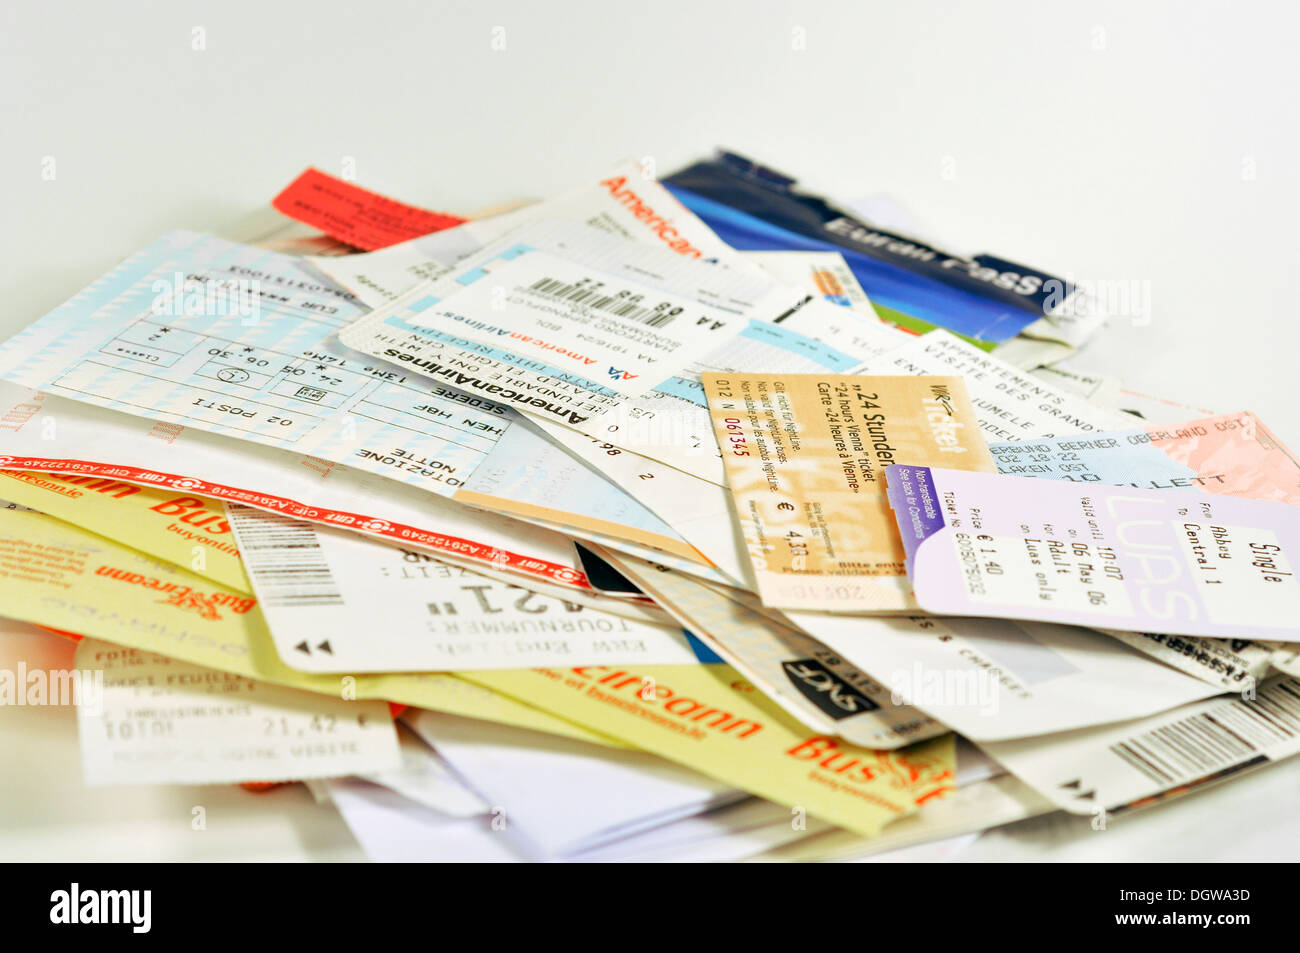 Pile of train, plane, and bus tickets Stock Photo